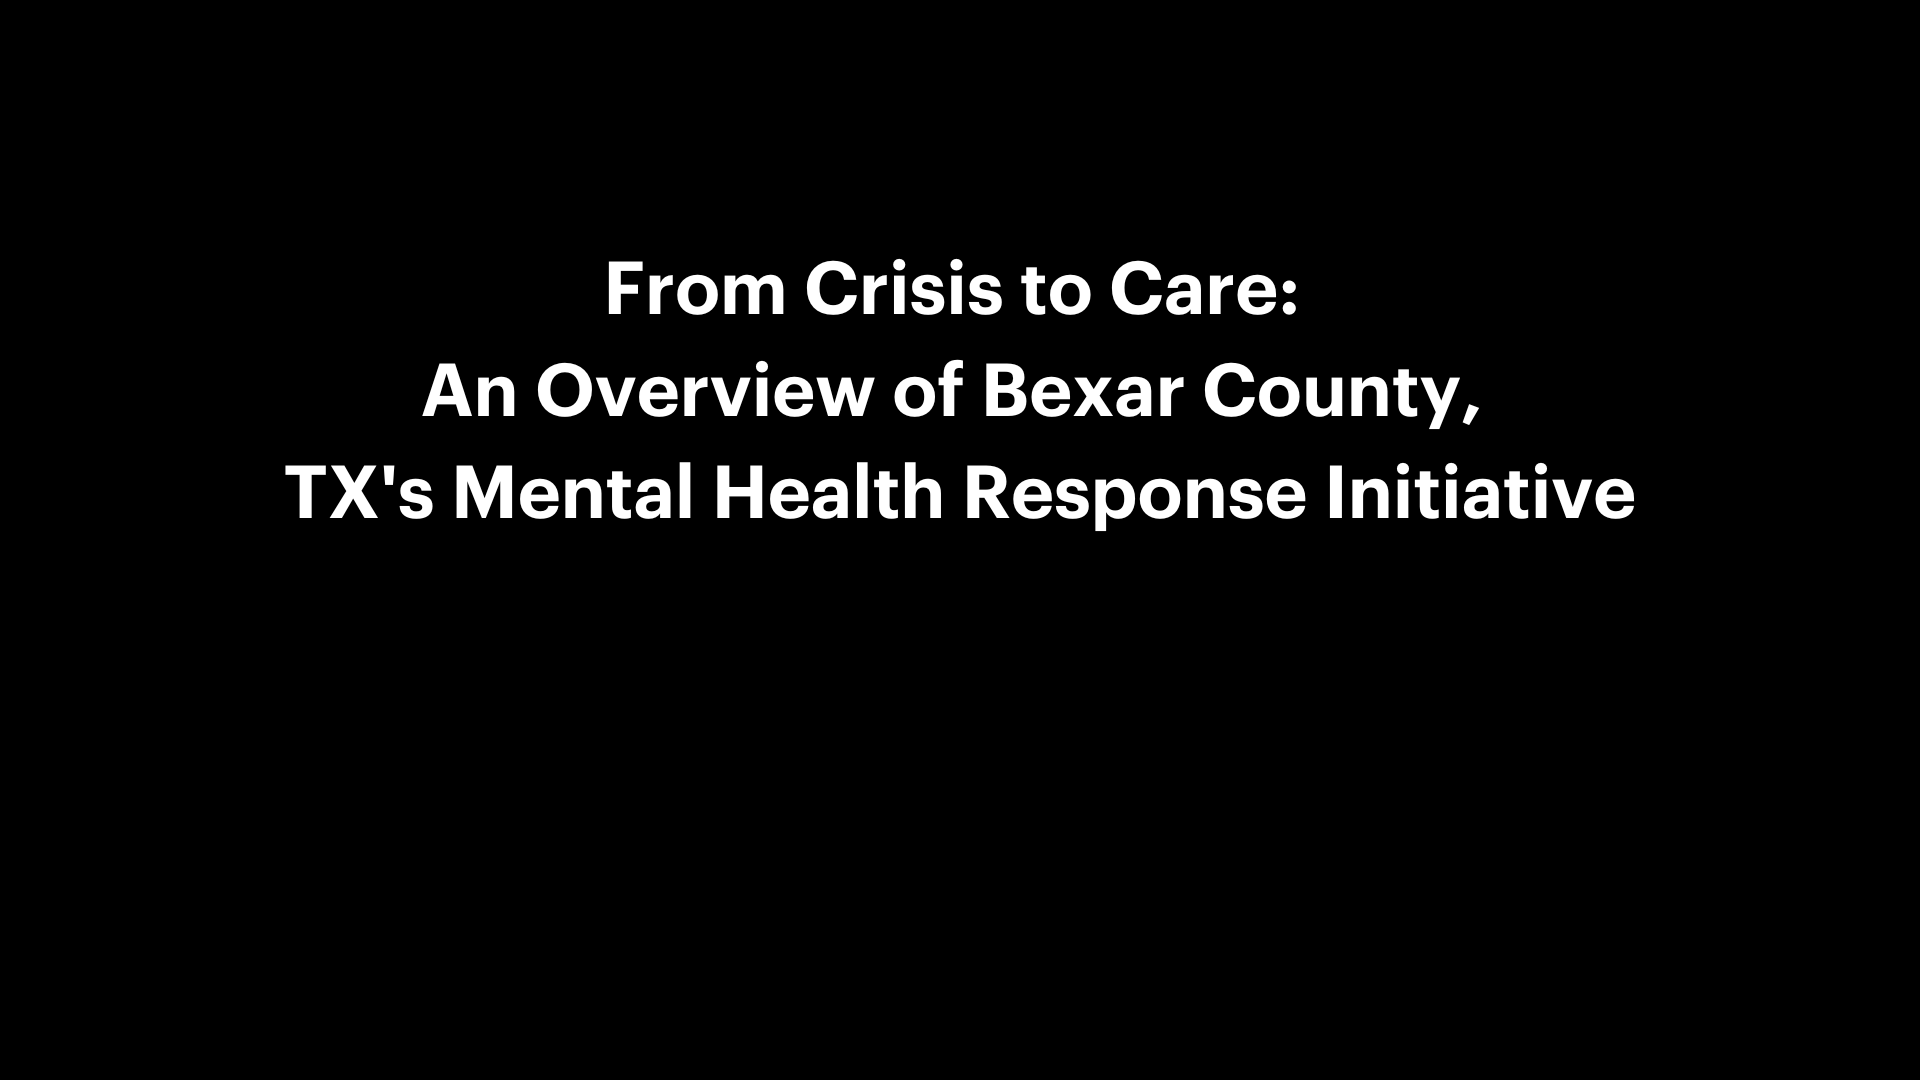 Image for From Crisis to Care: An Overview of Bexar County, TX’s Mental Health Response Initiative